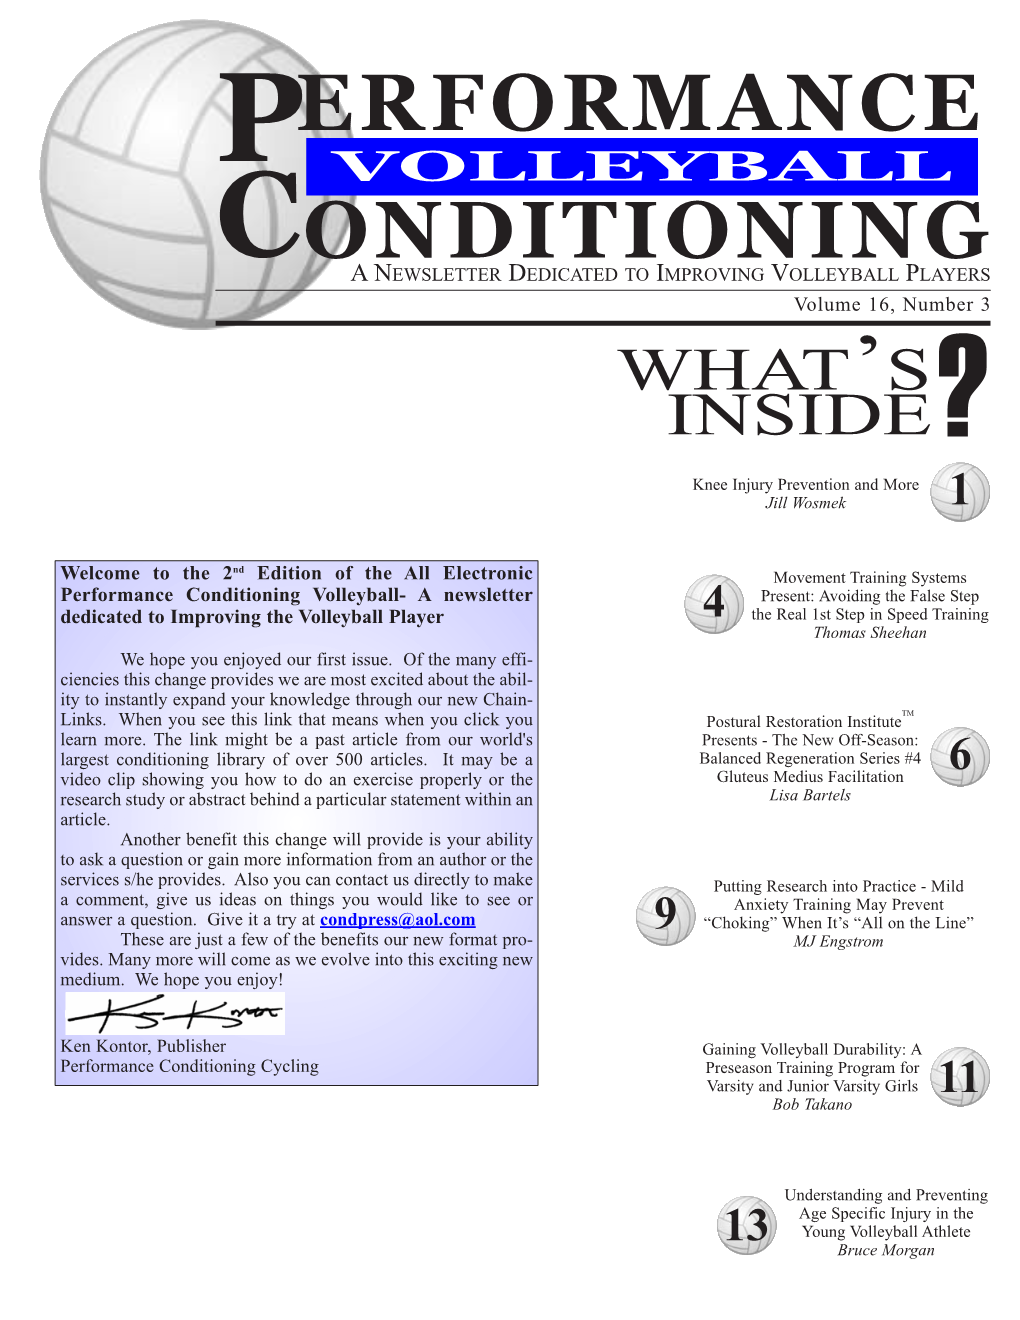 VOLLEYBALL CONDITIONING ANEWSLETTER DEDICATED to IMPROVING VOLLEYBALL PLAYERS Volume 16, Number 3 WHAT’S INSIDE?